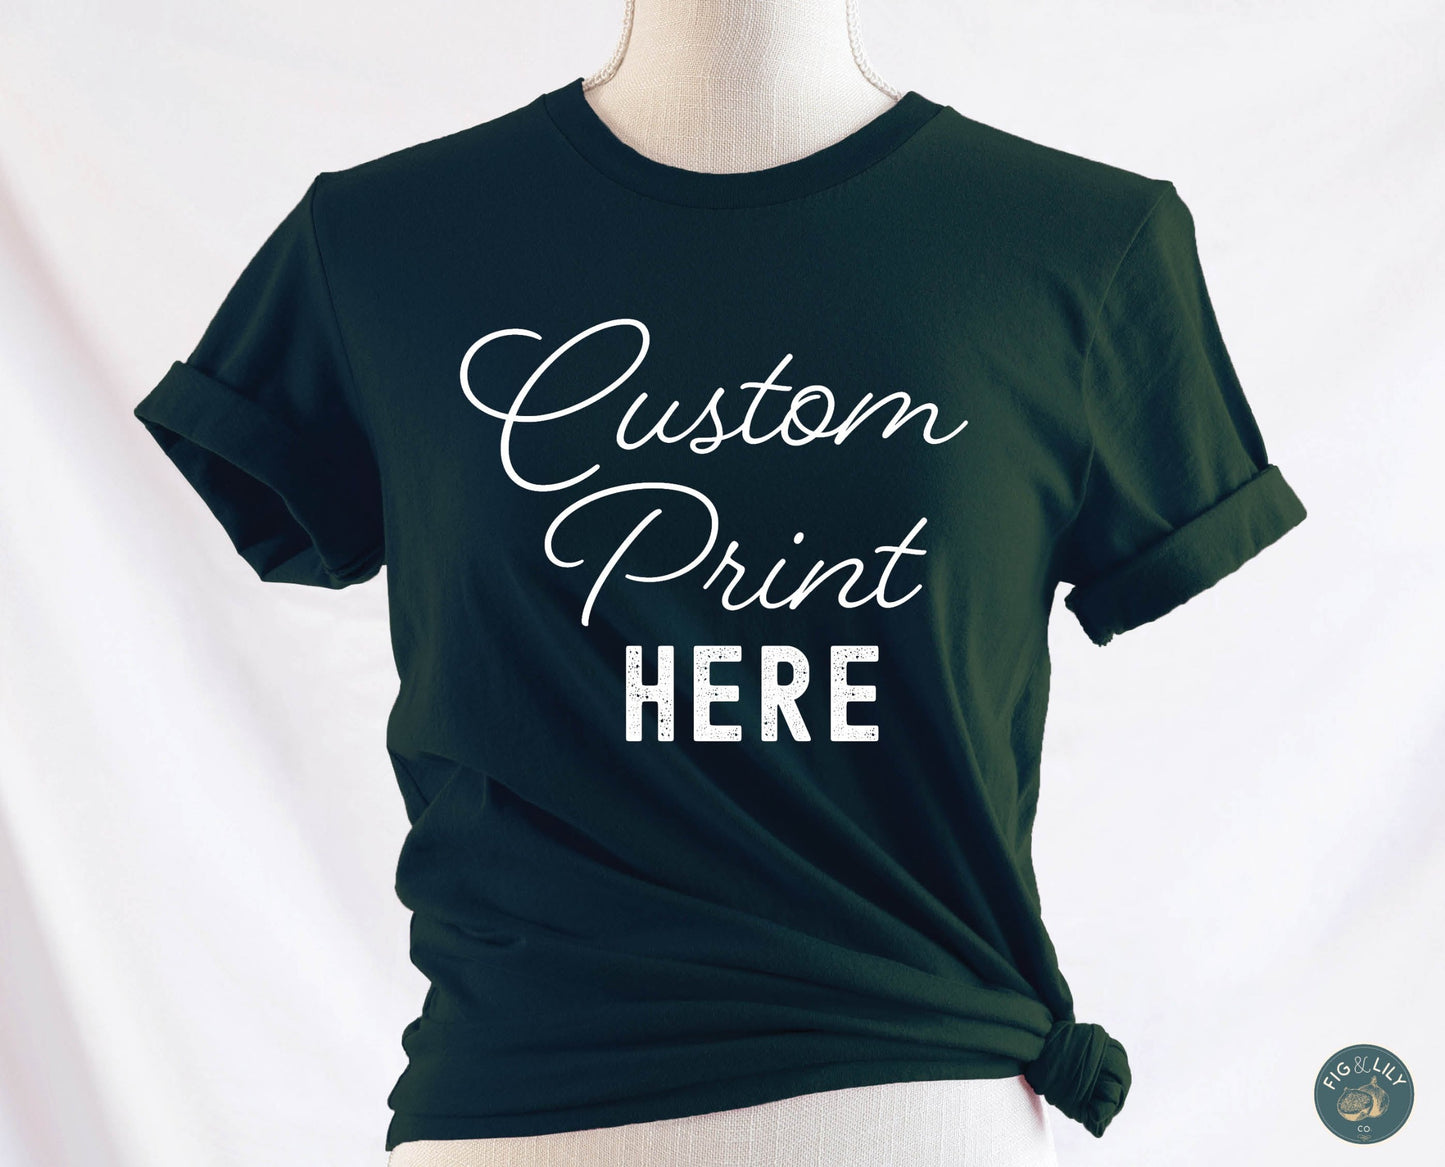 Fig & Lily Co. custom soft forest green unisex t-shirt with your personalized design printed, custom graphic design tees for men and women